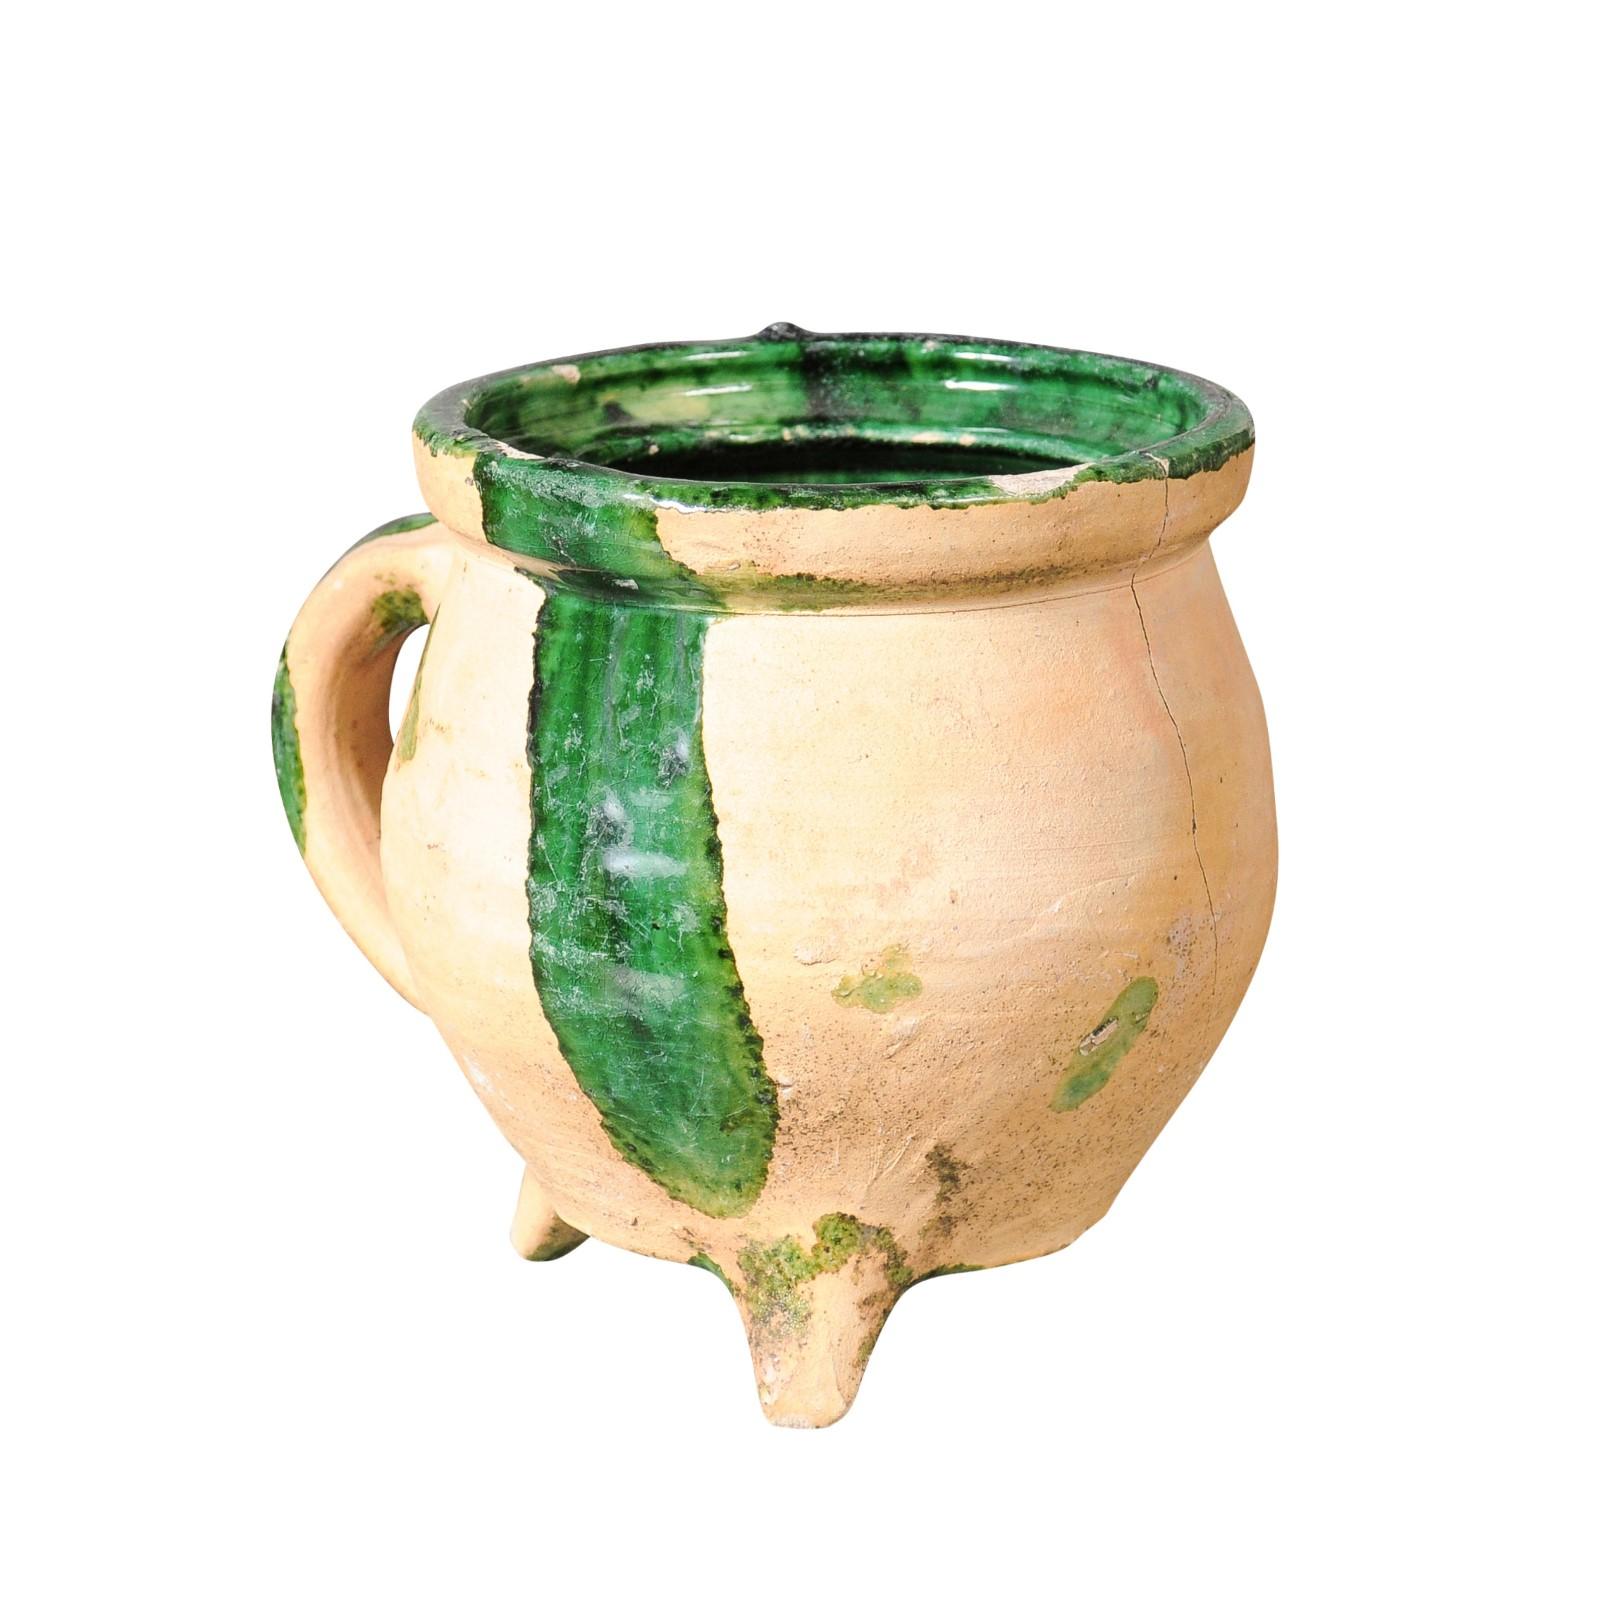 A French Provincial spheroidal pottery cooking pot from the 19th century with green glazed accents, molded handle and tripod base. Created in Southern France during the 19th century, this pottery cooking pot features a circular mouth adorned with a